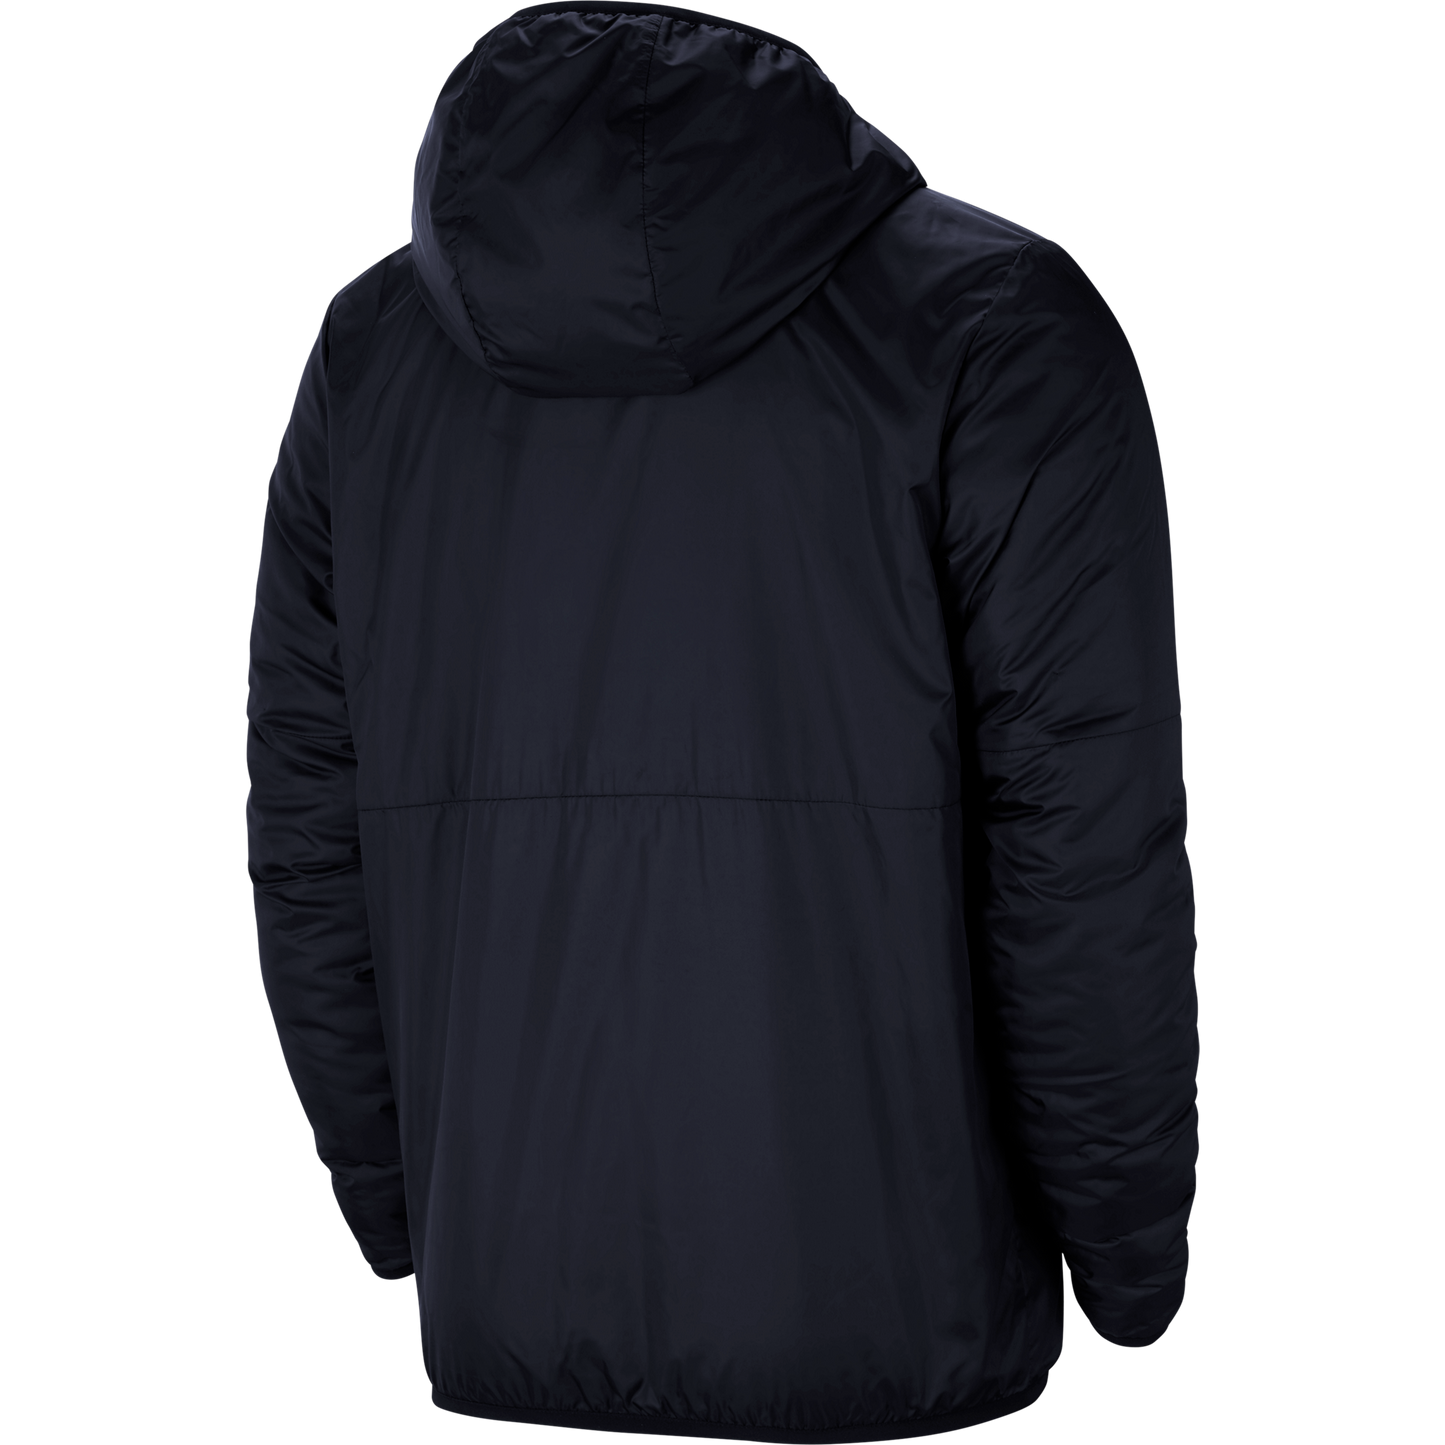 RED SOX SPORTS CLUB NIKE THERMAL FALL JACKET - MEN'S